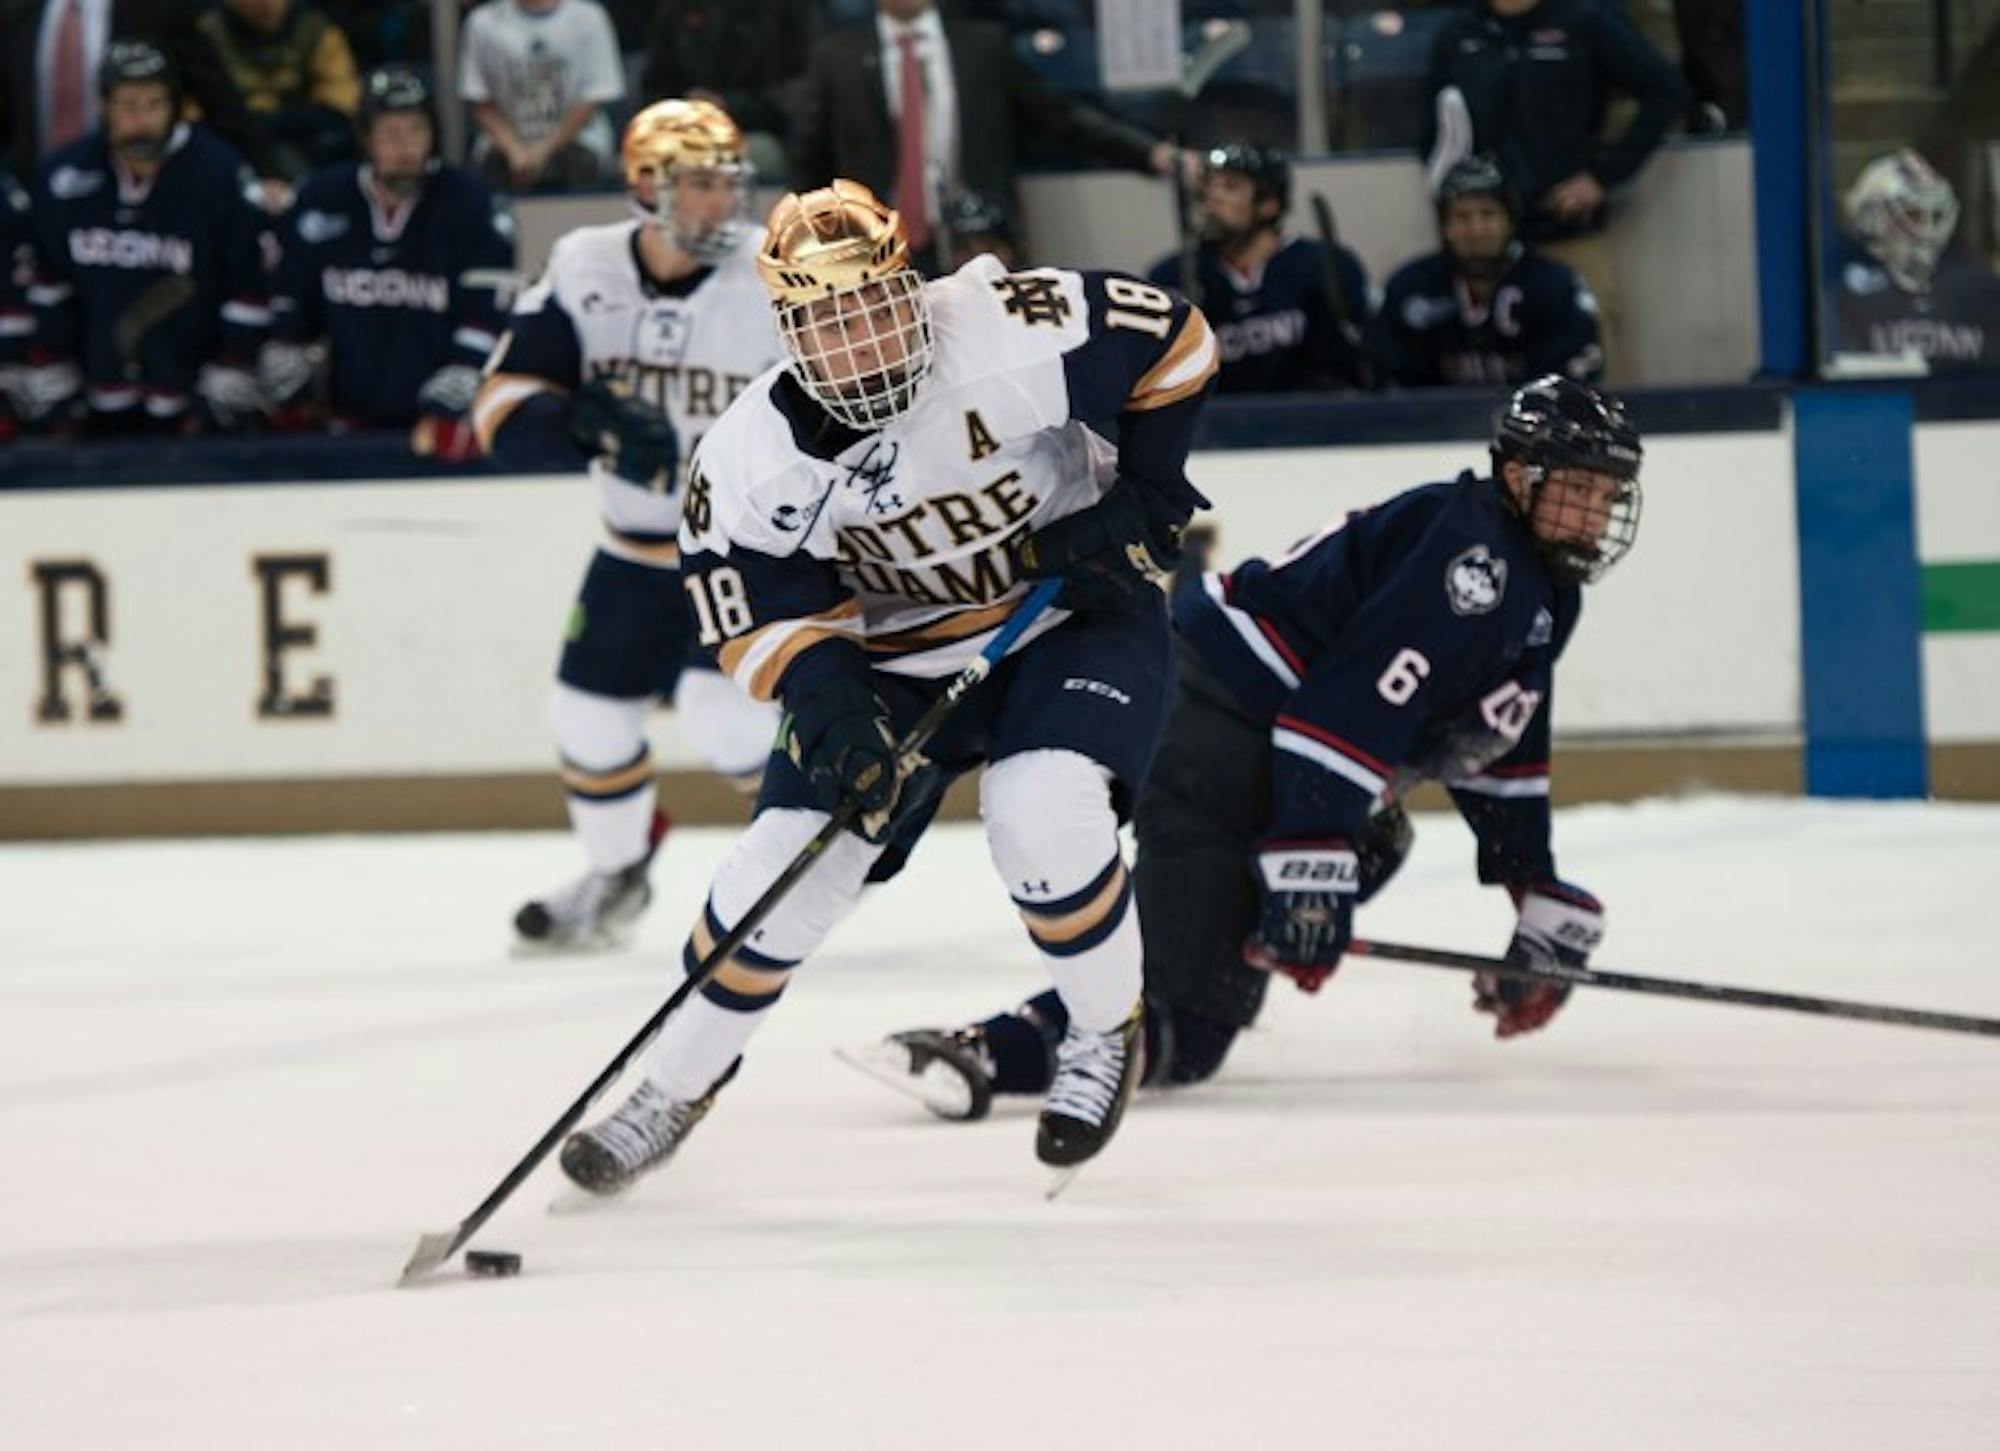 Irish junior forward Jake Evans looks up the ice during Notre Dame’s game against UConn on Oct. 27 at Compton Arena.